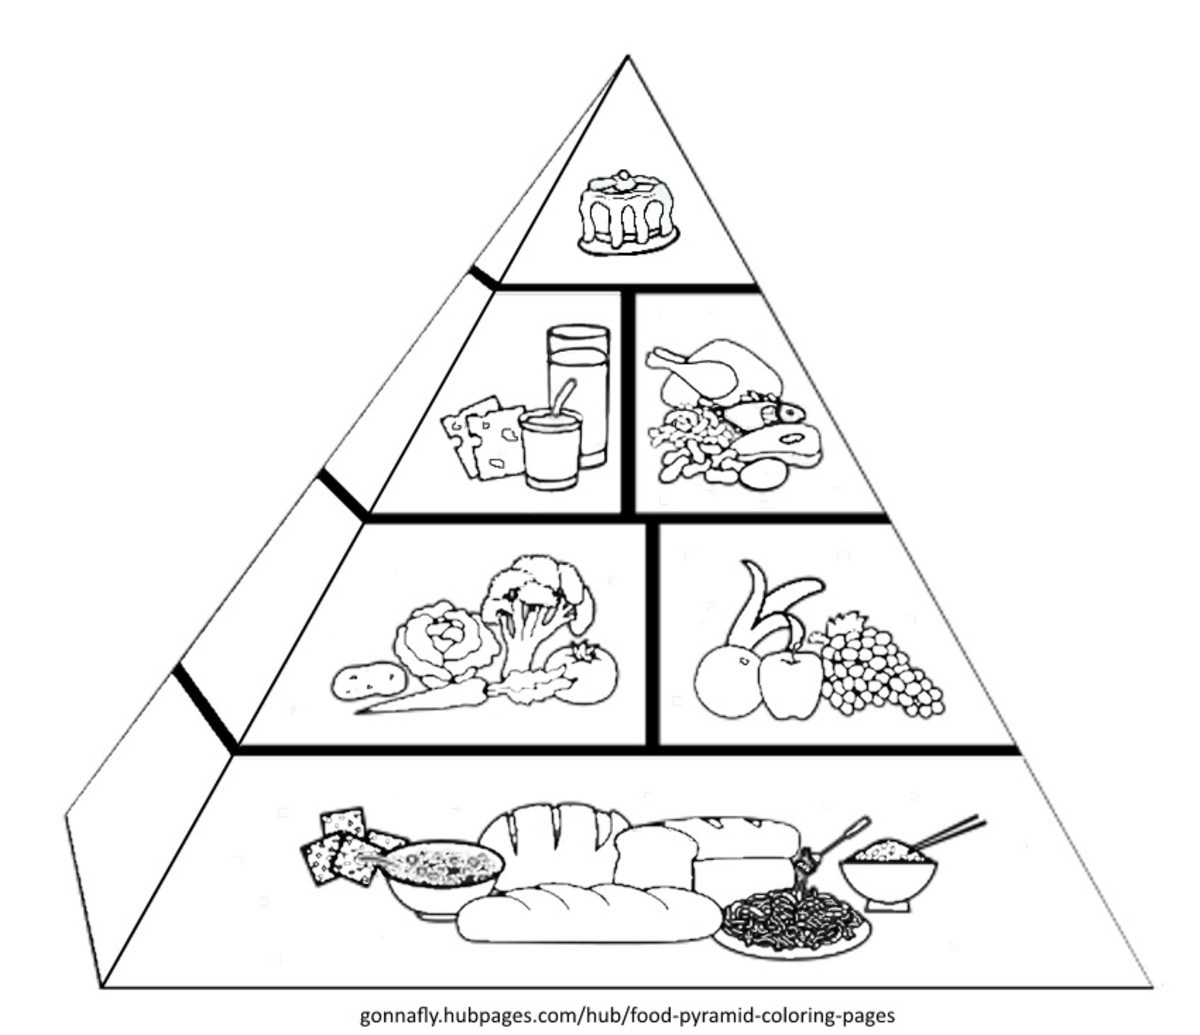 Simple Nutrition Pyramid Coloring Page with simple drawing